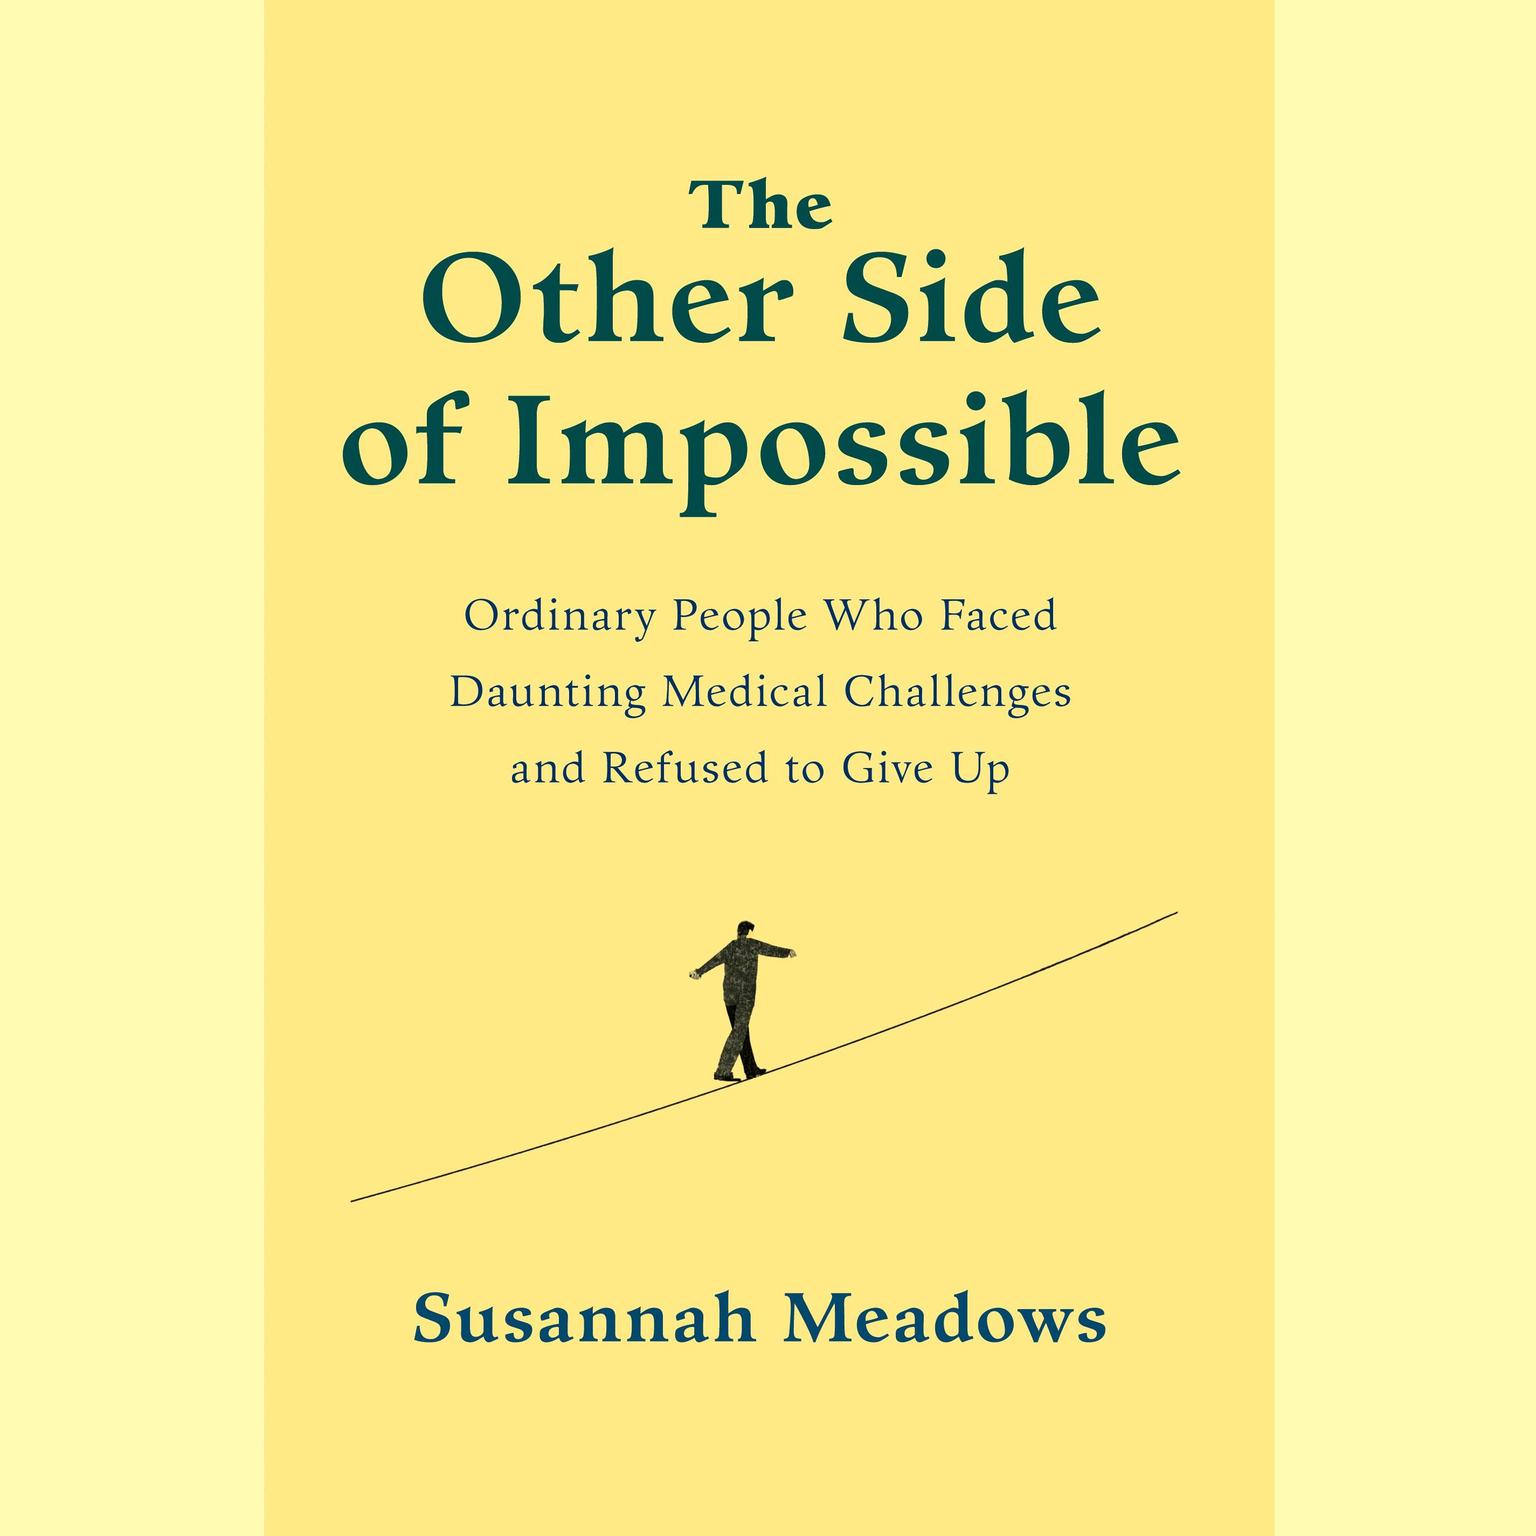 The Other Side of Impossible: Ordinary People Who Faced Daunting Medical Challenges and Refused to Give Up Audiobook, by Susannah Meadows